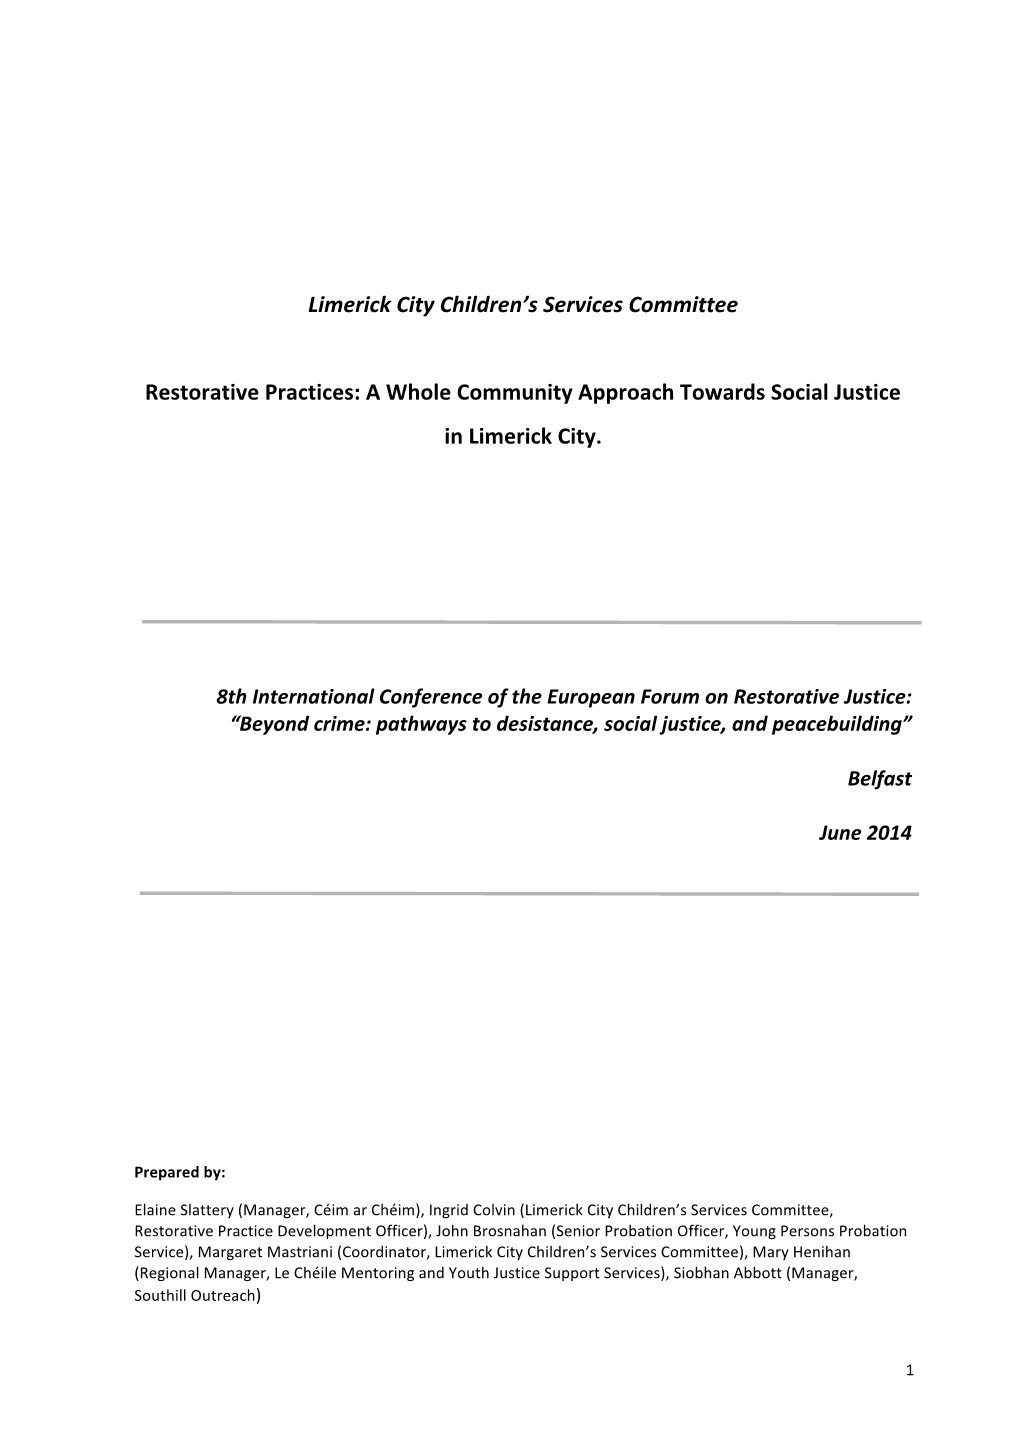 Limerick City Children's Services Committee Restorative Practices: A